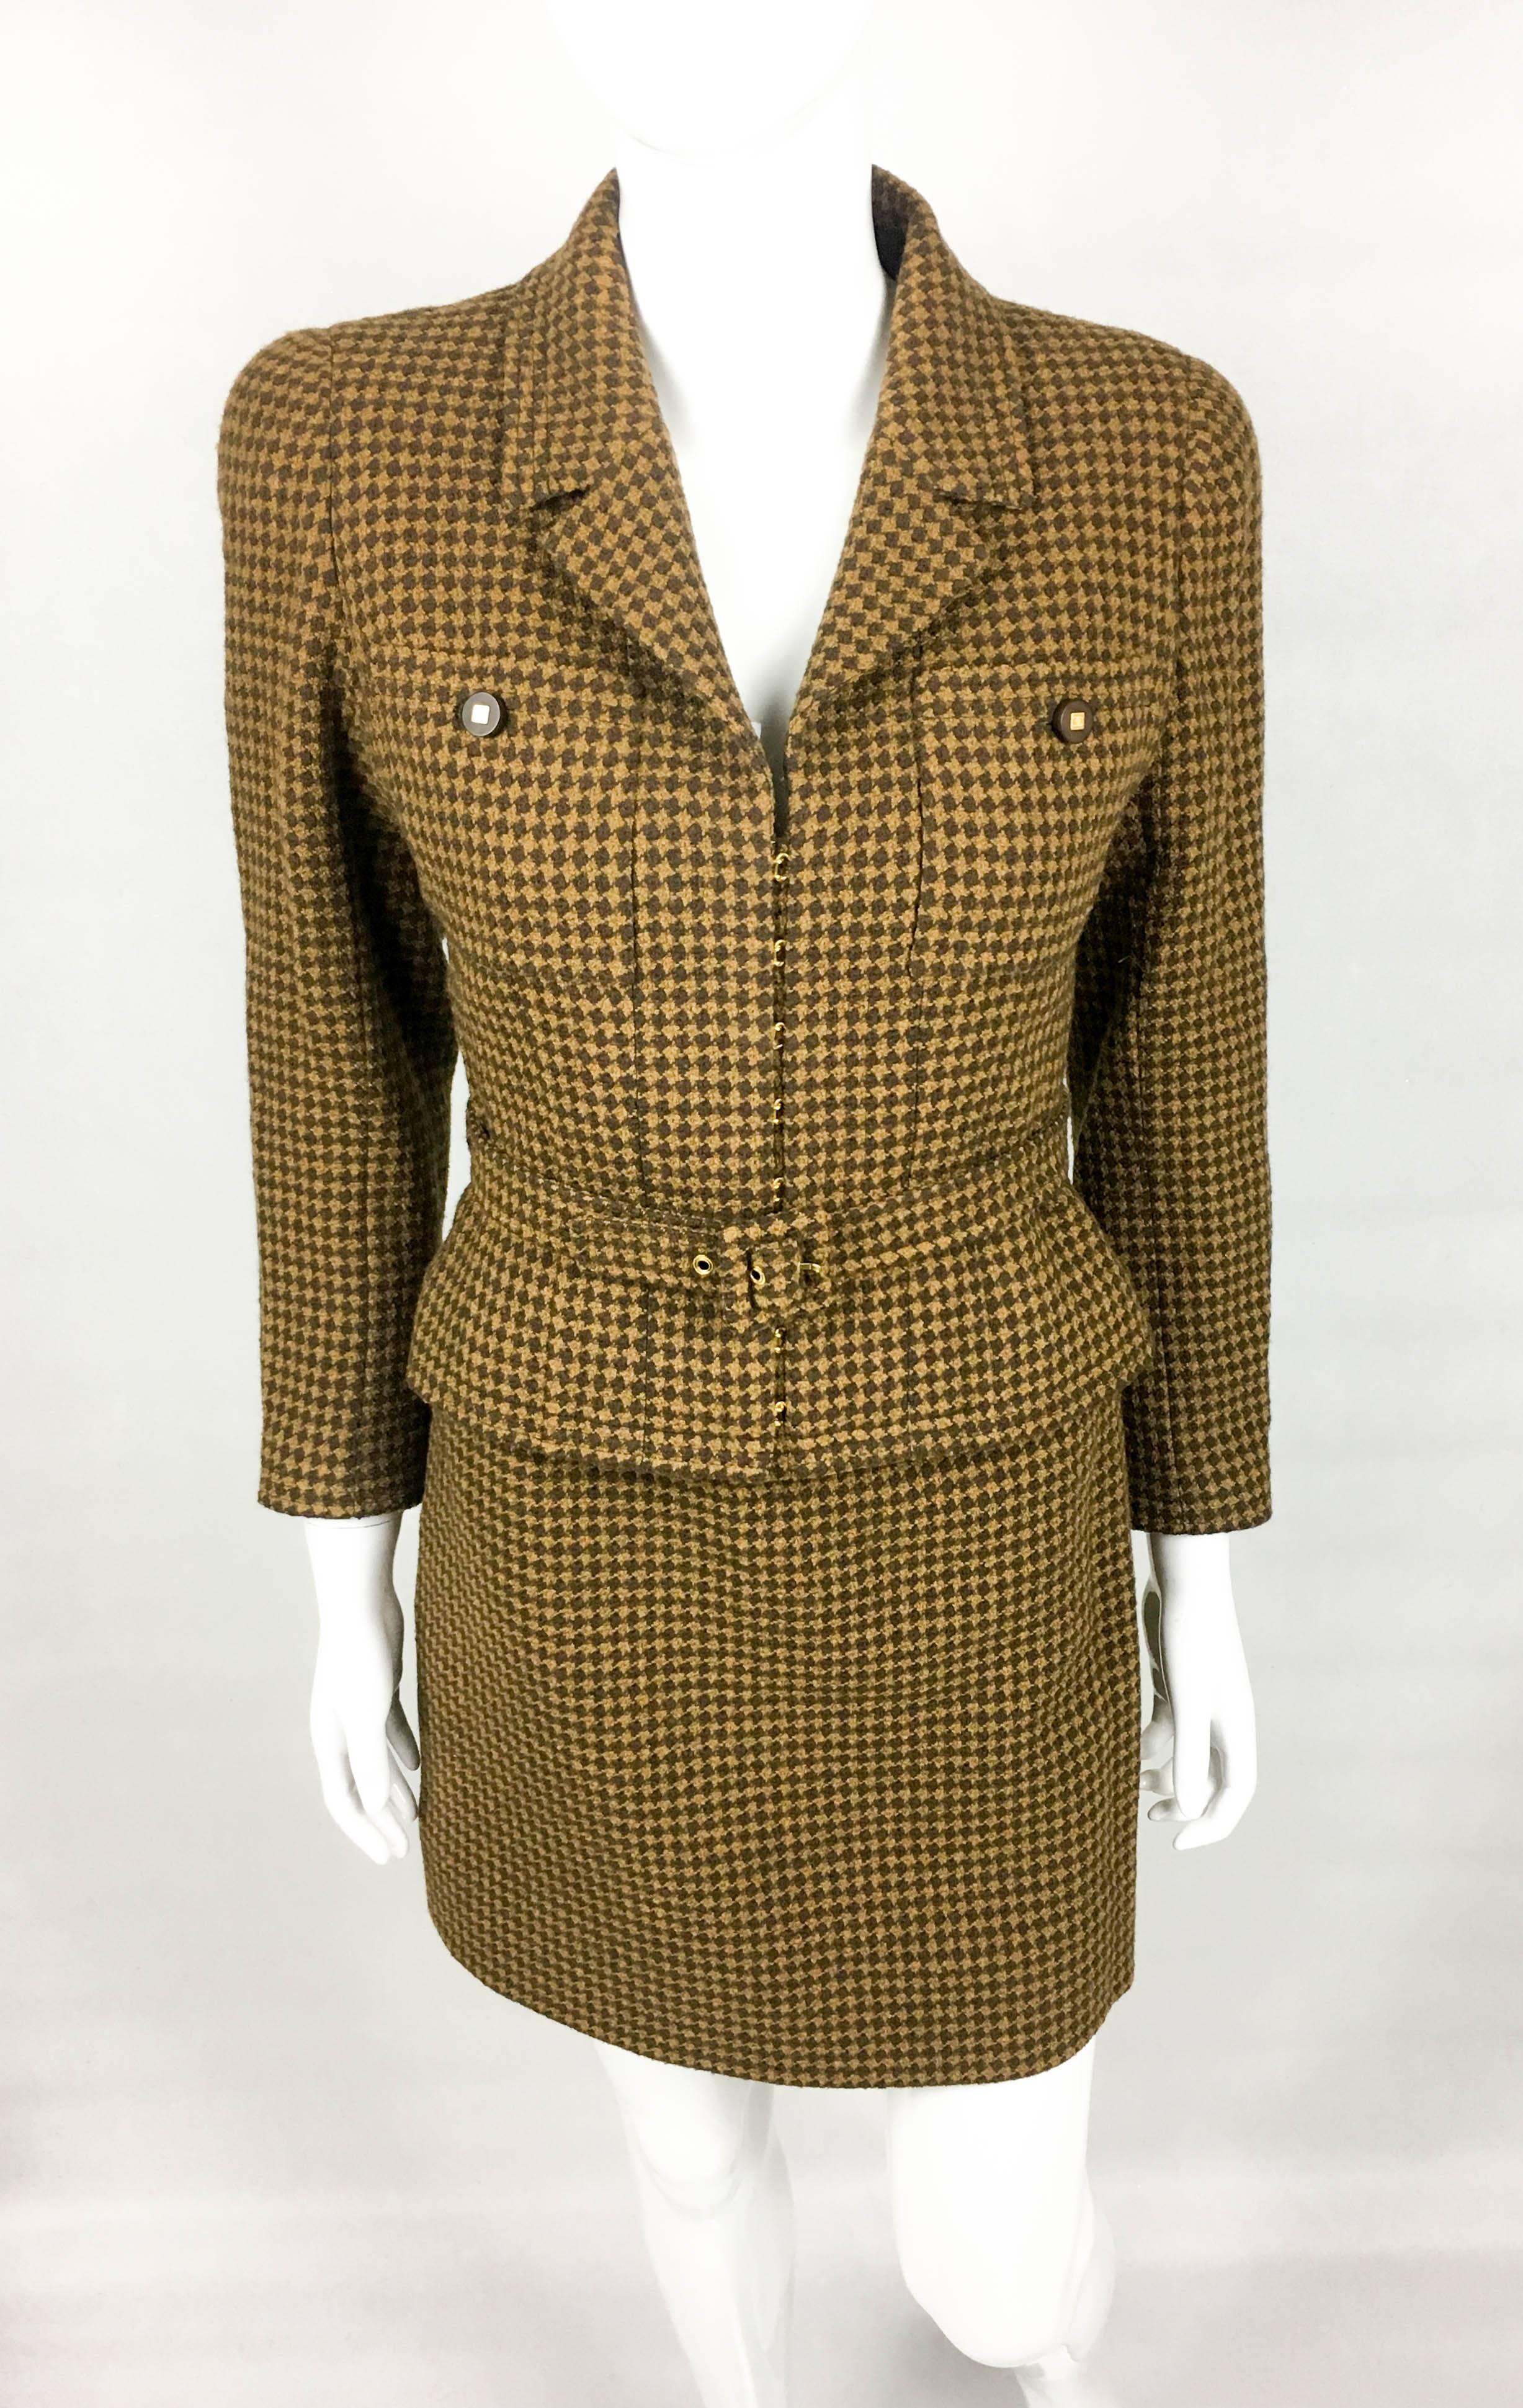 Women's 1996 Chanel Brown Houndstooth Skirt Suit